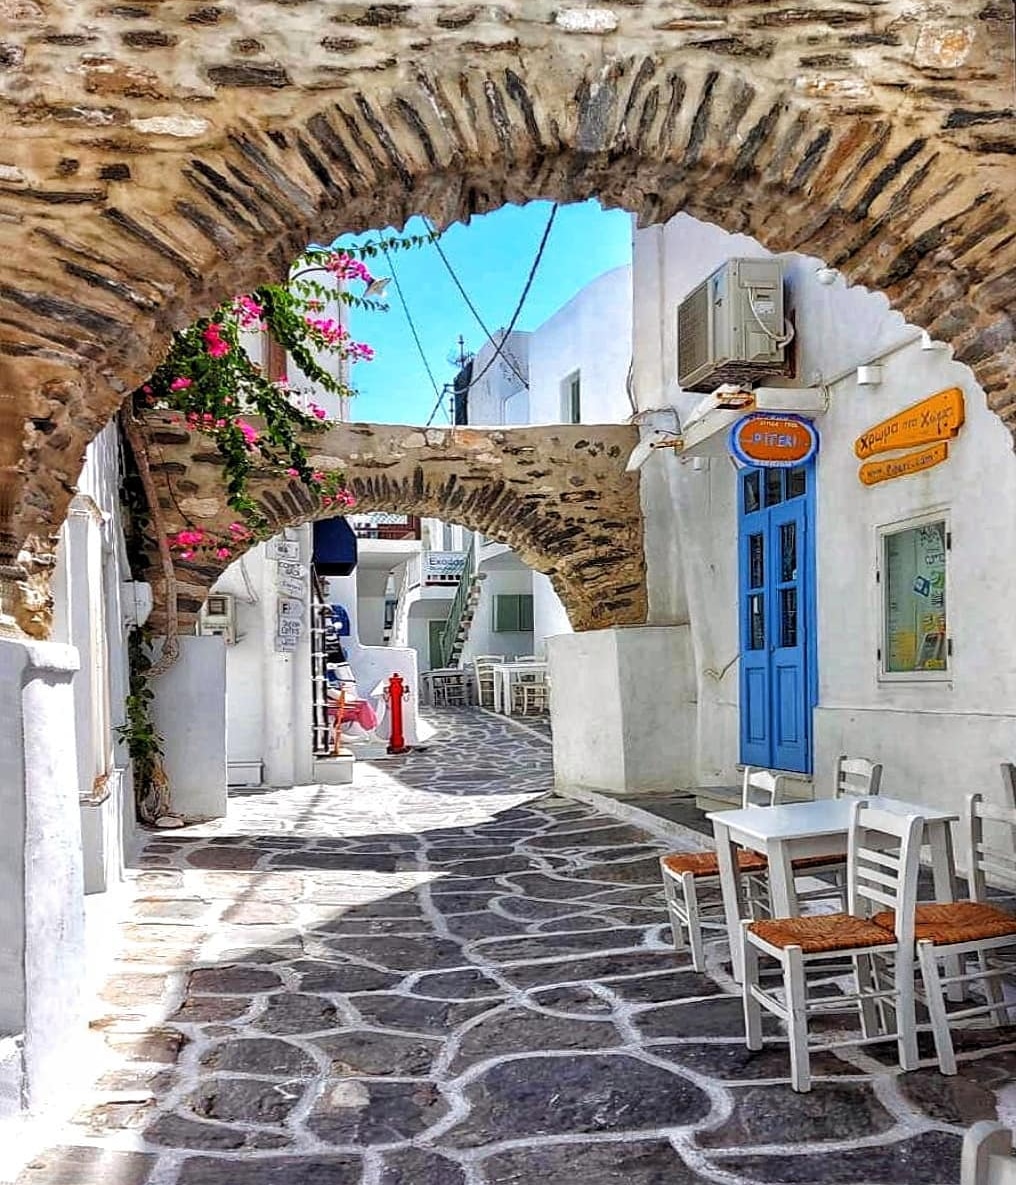 We wish you a nice weekend from the alleys of #Naousa, the beautiful fishing village of #Paros island.
ig 📷 goun.maria